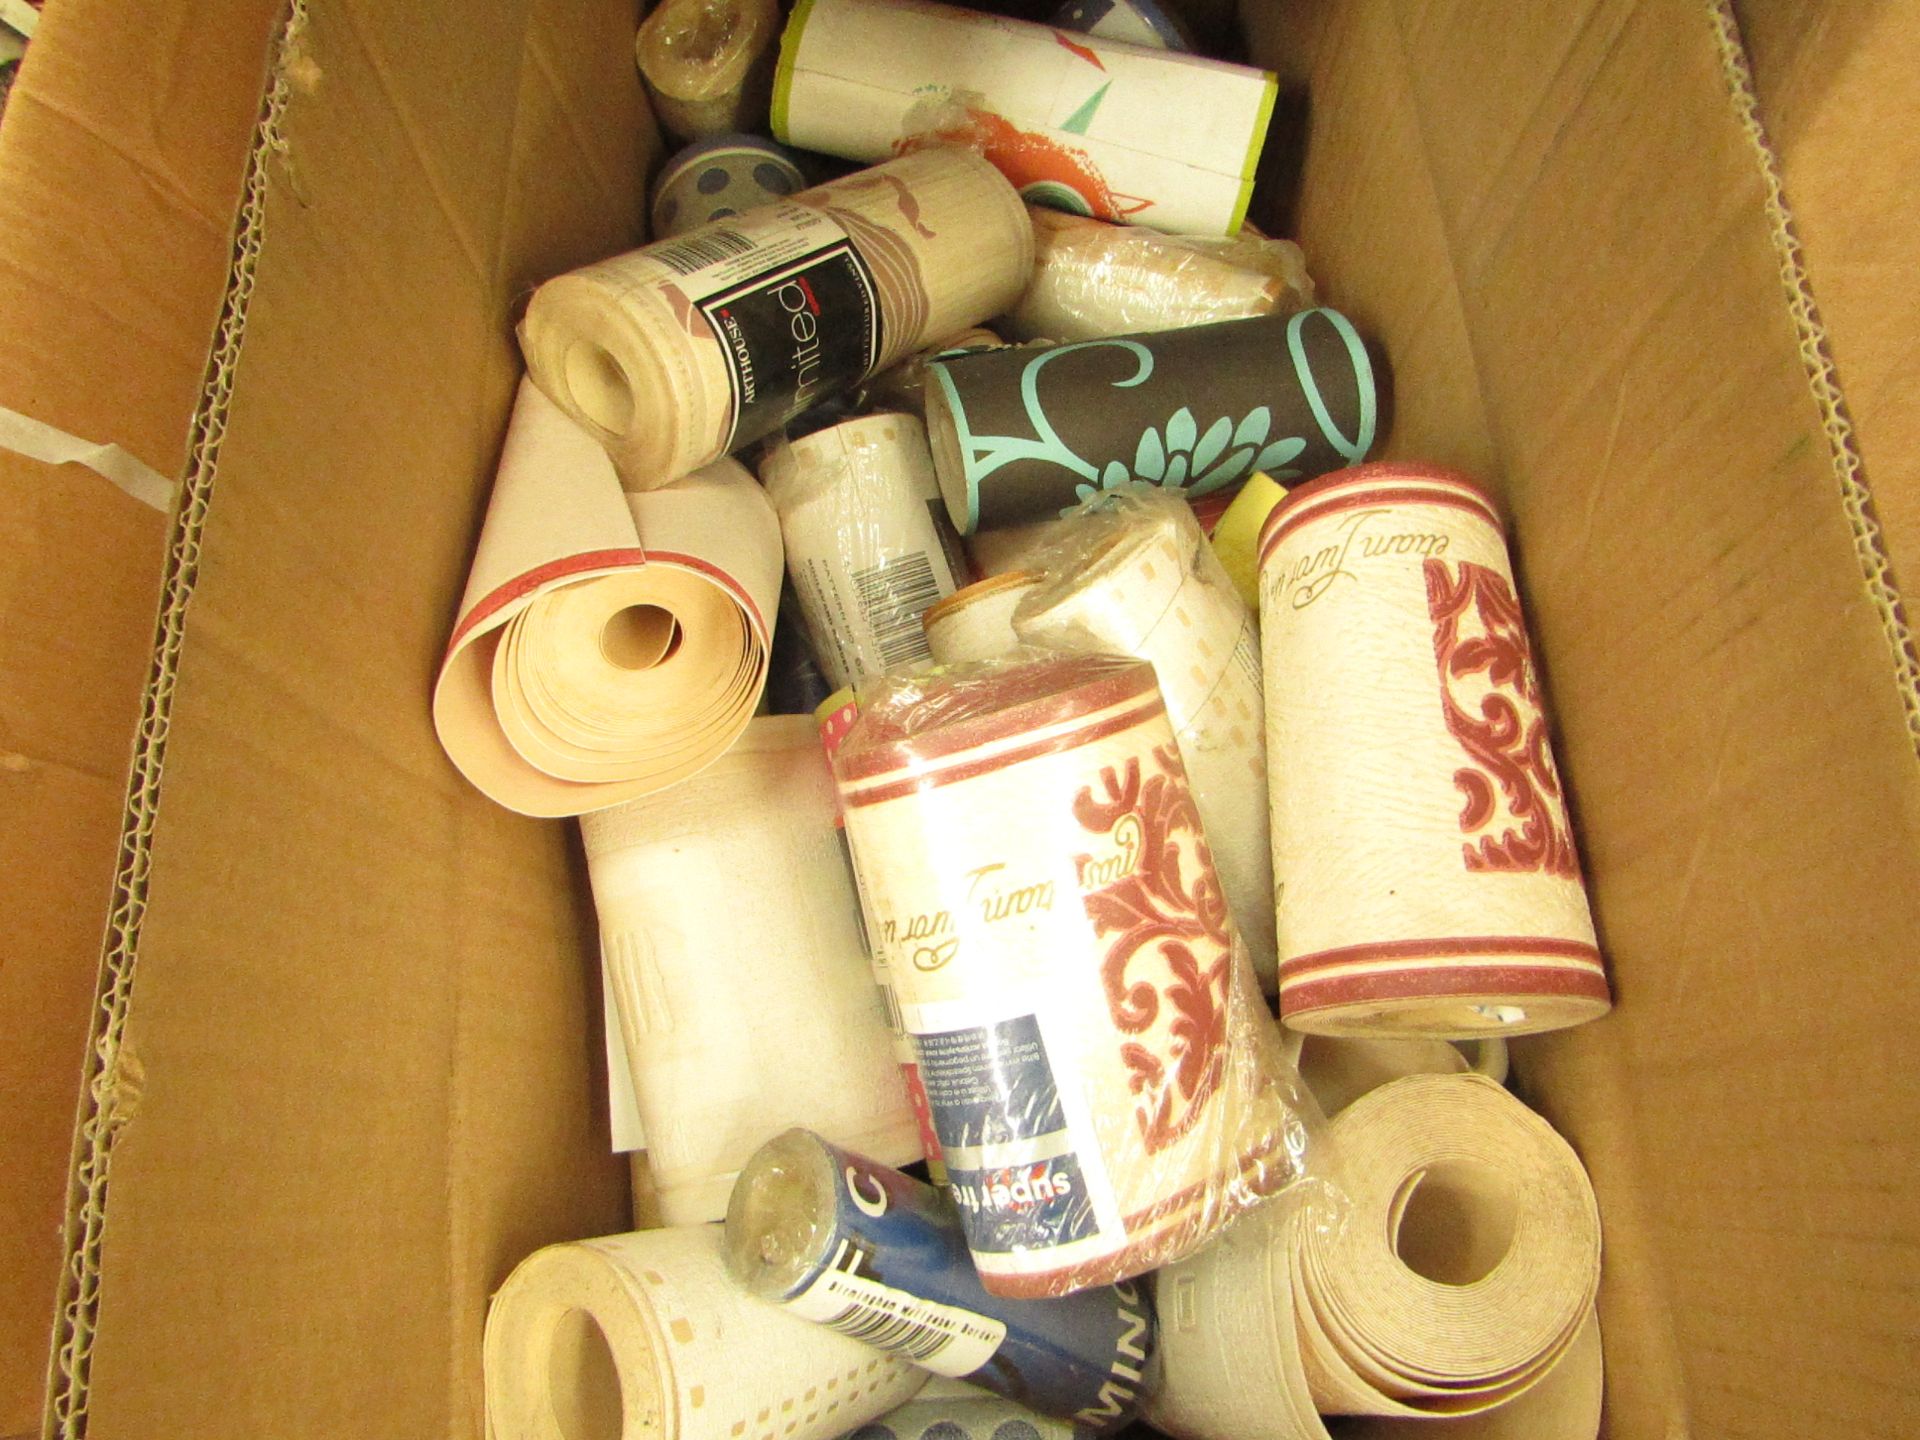 Box Containing Approx 15+ Various Assorted Wallpaper Borders - Some Are Unpackaged.